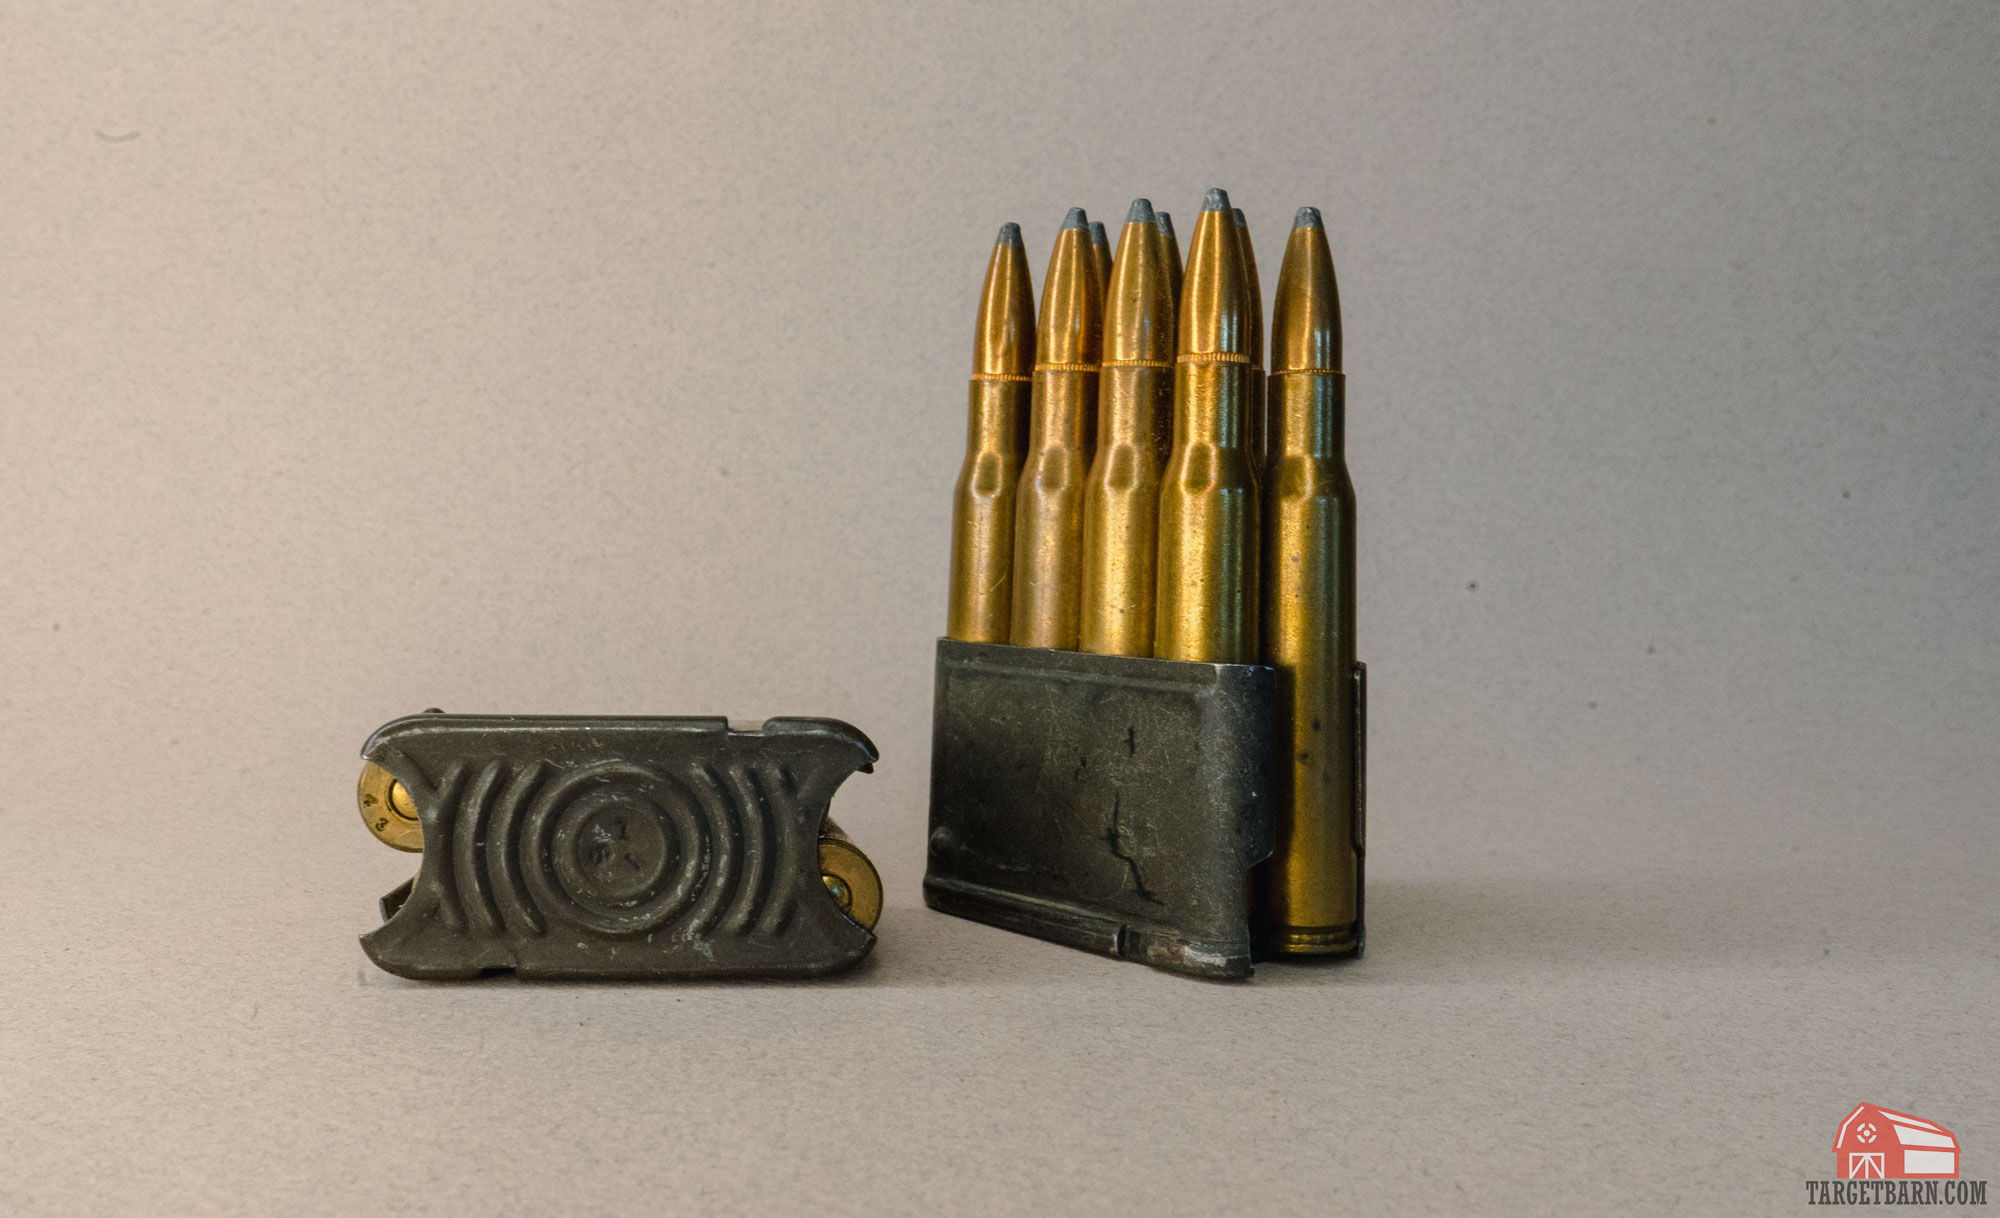 two en bloc clips holding .30-06 ammo for the m1 garand rifle